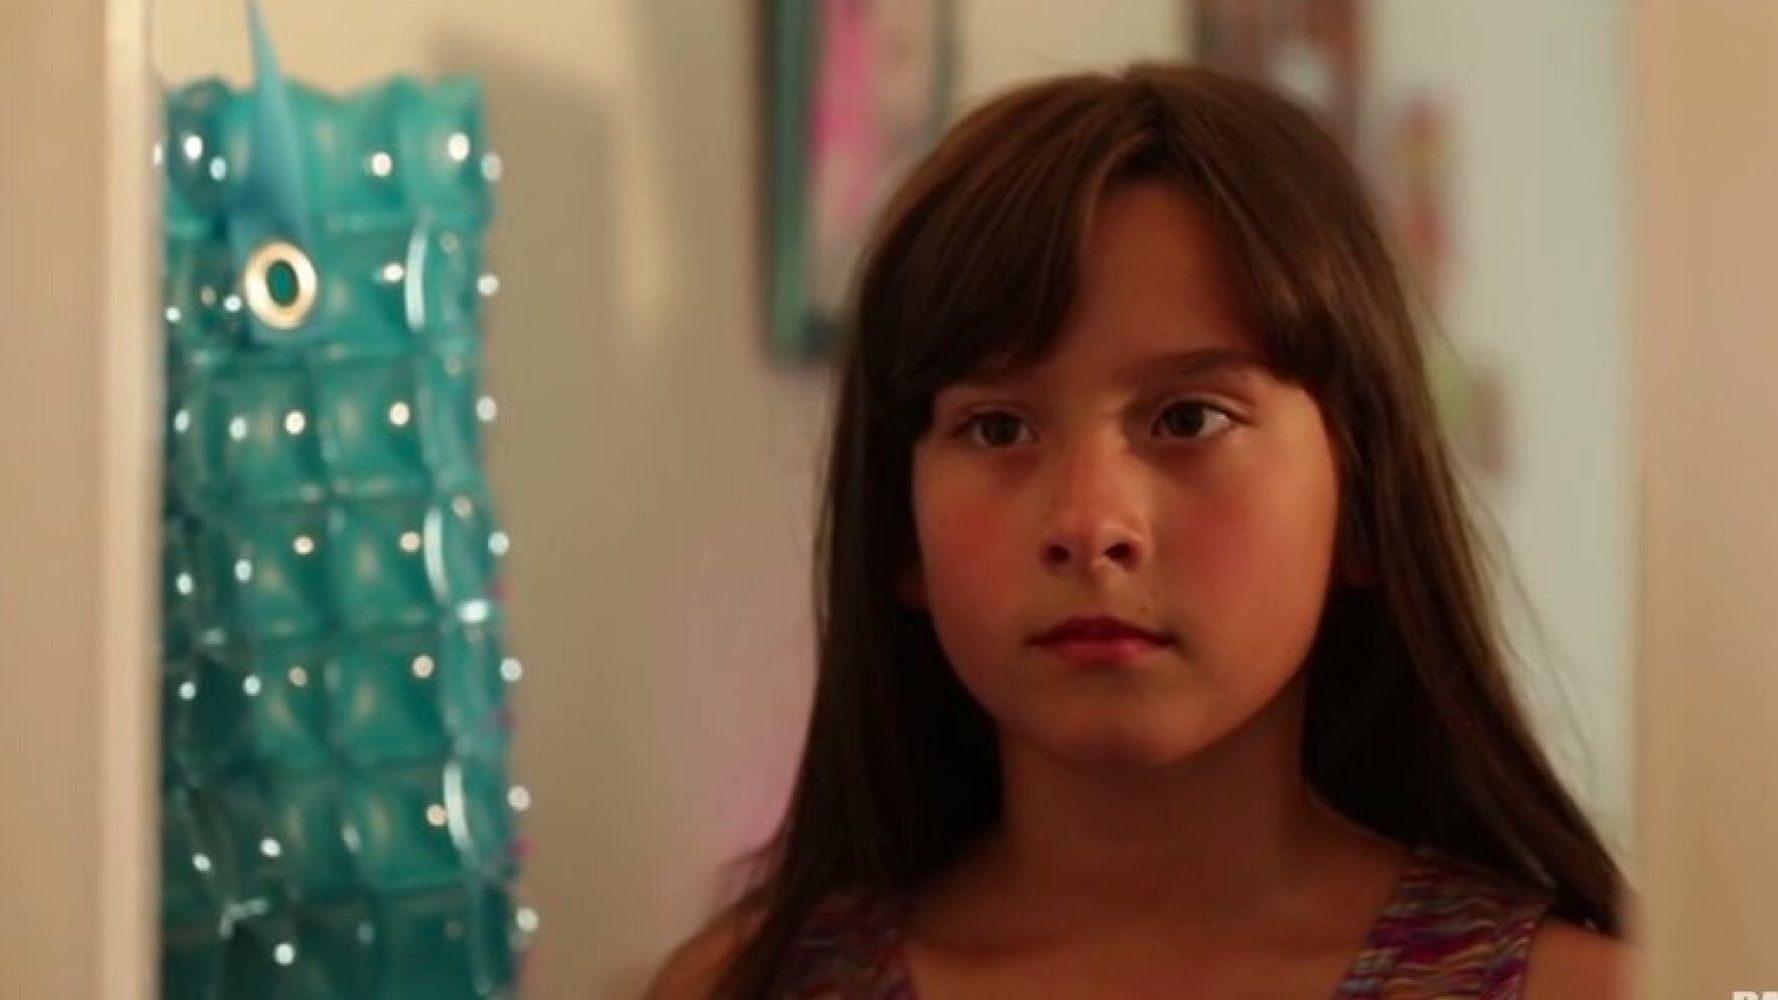 Film Captures The Moment A Young Girl Realises She Needs To Wear A Bra.